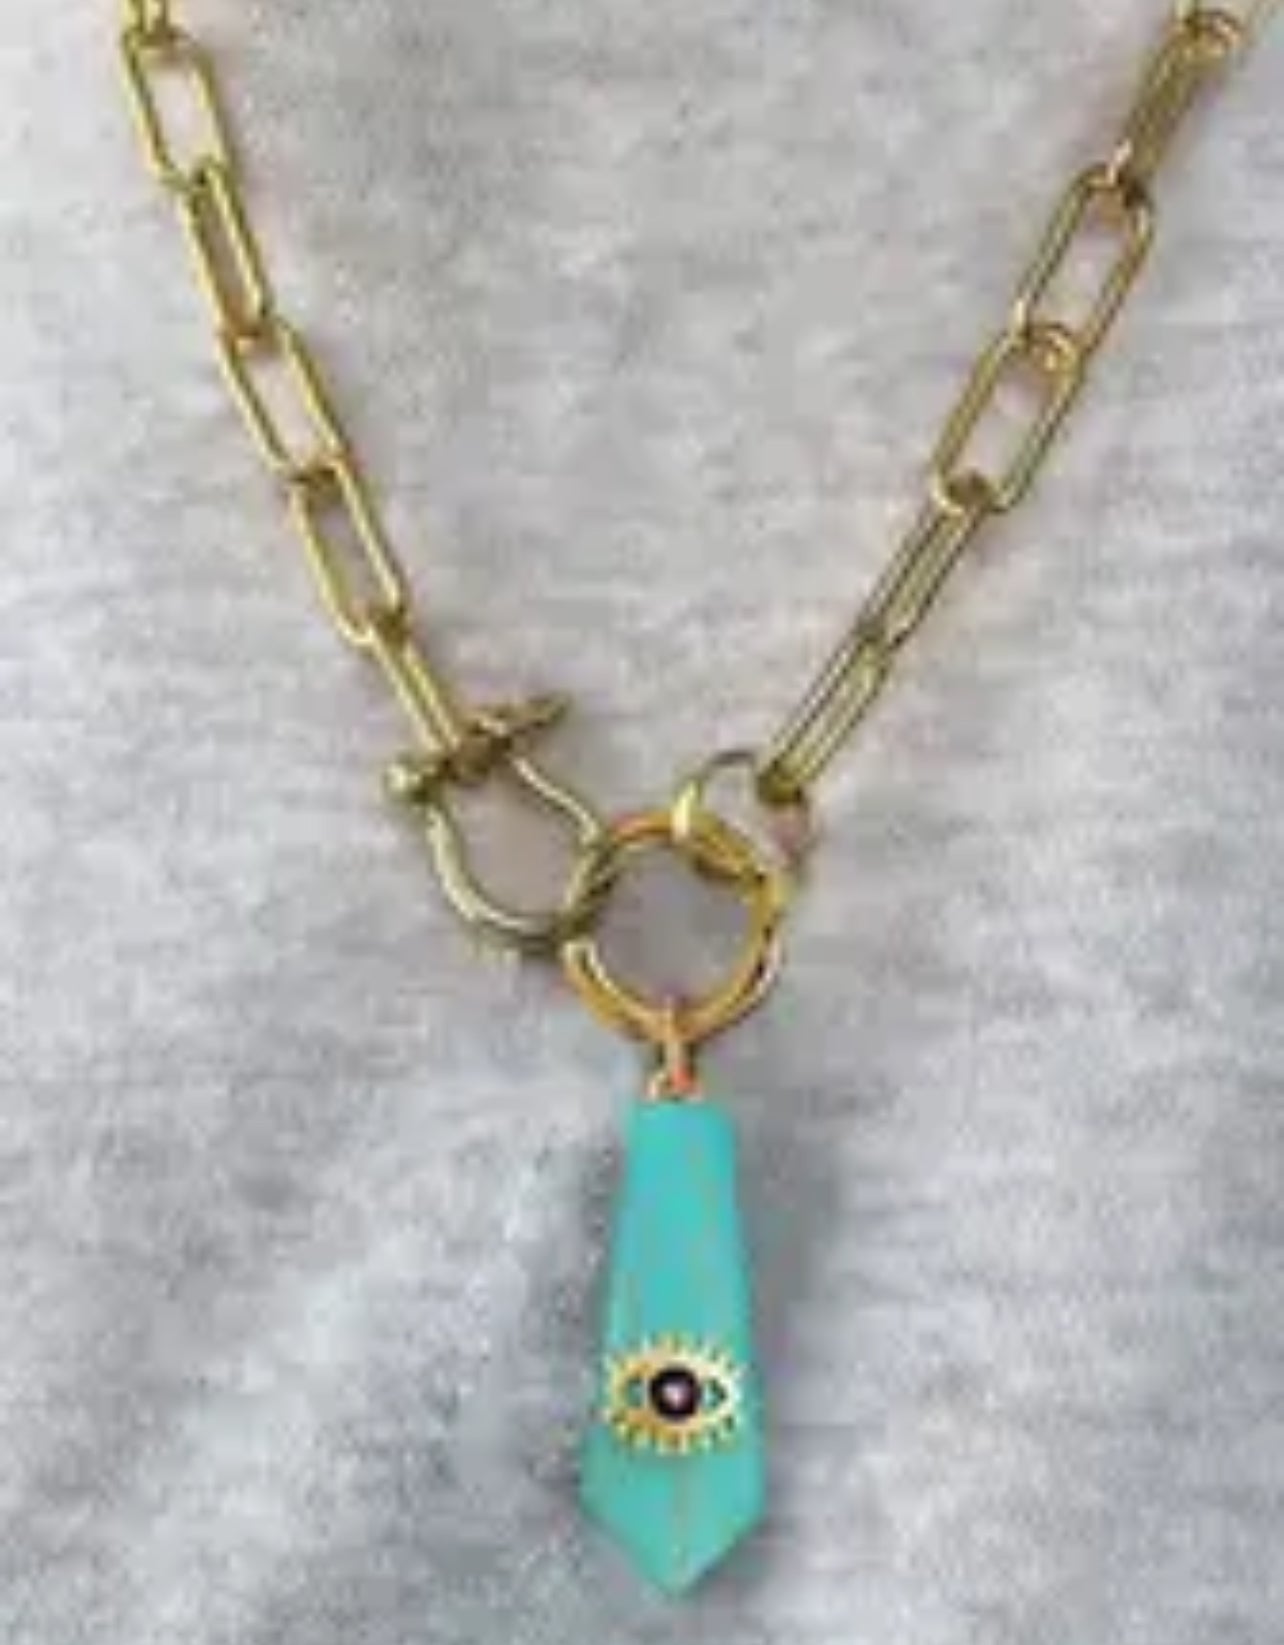 Necklace Gold plated long Agates pendant turquoise third eye